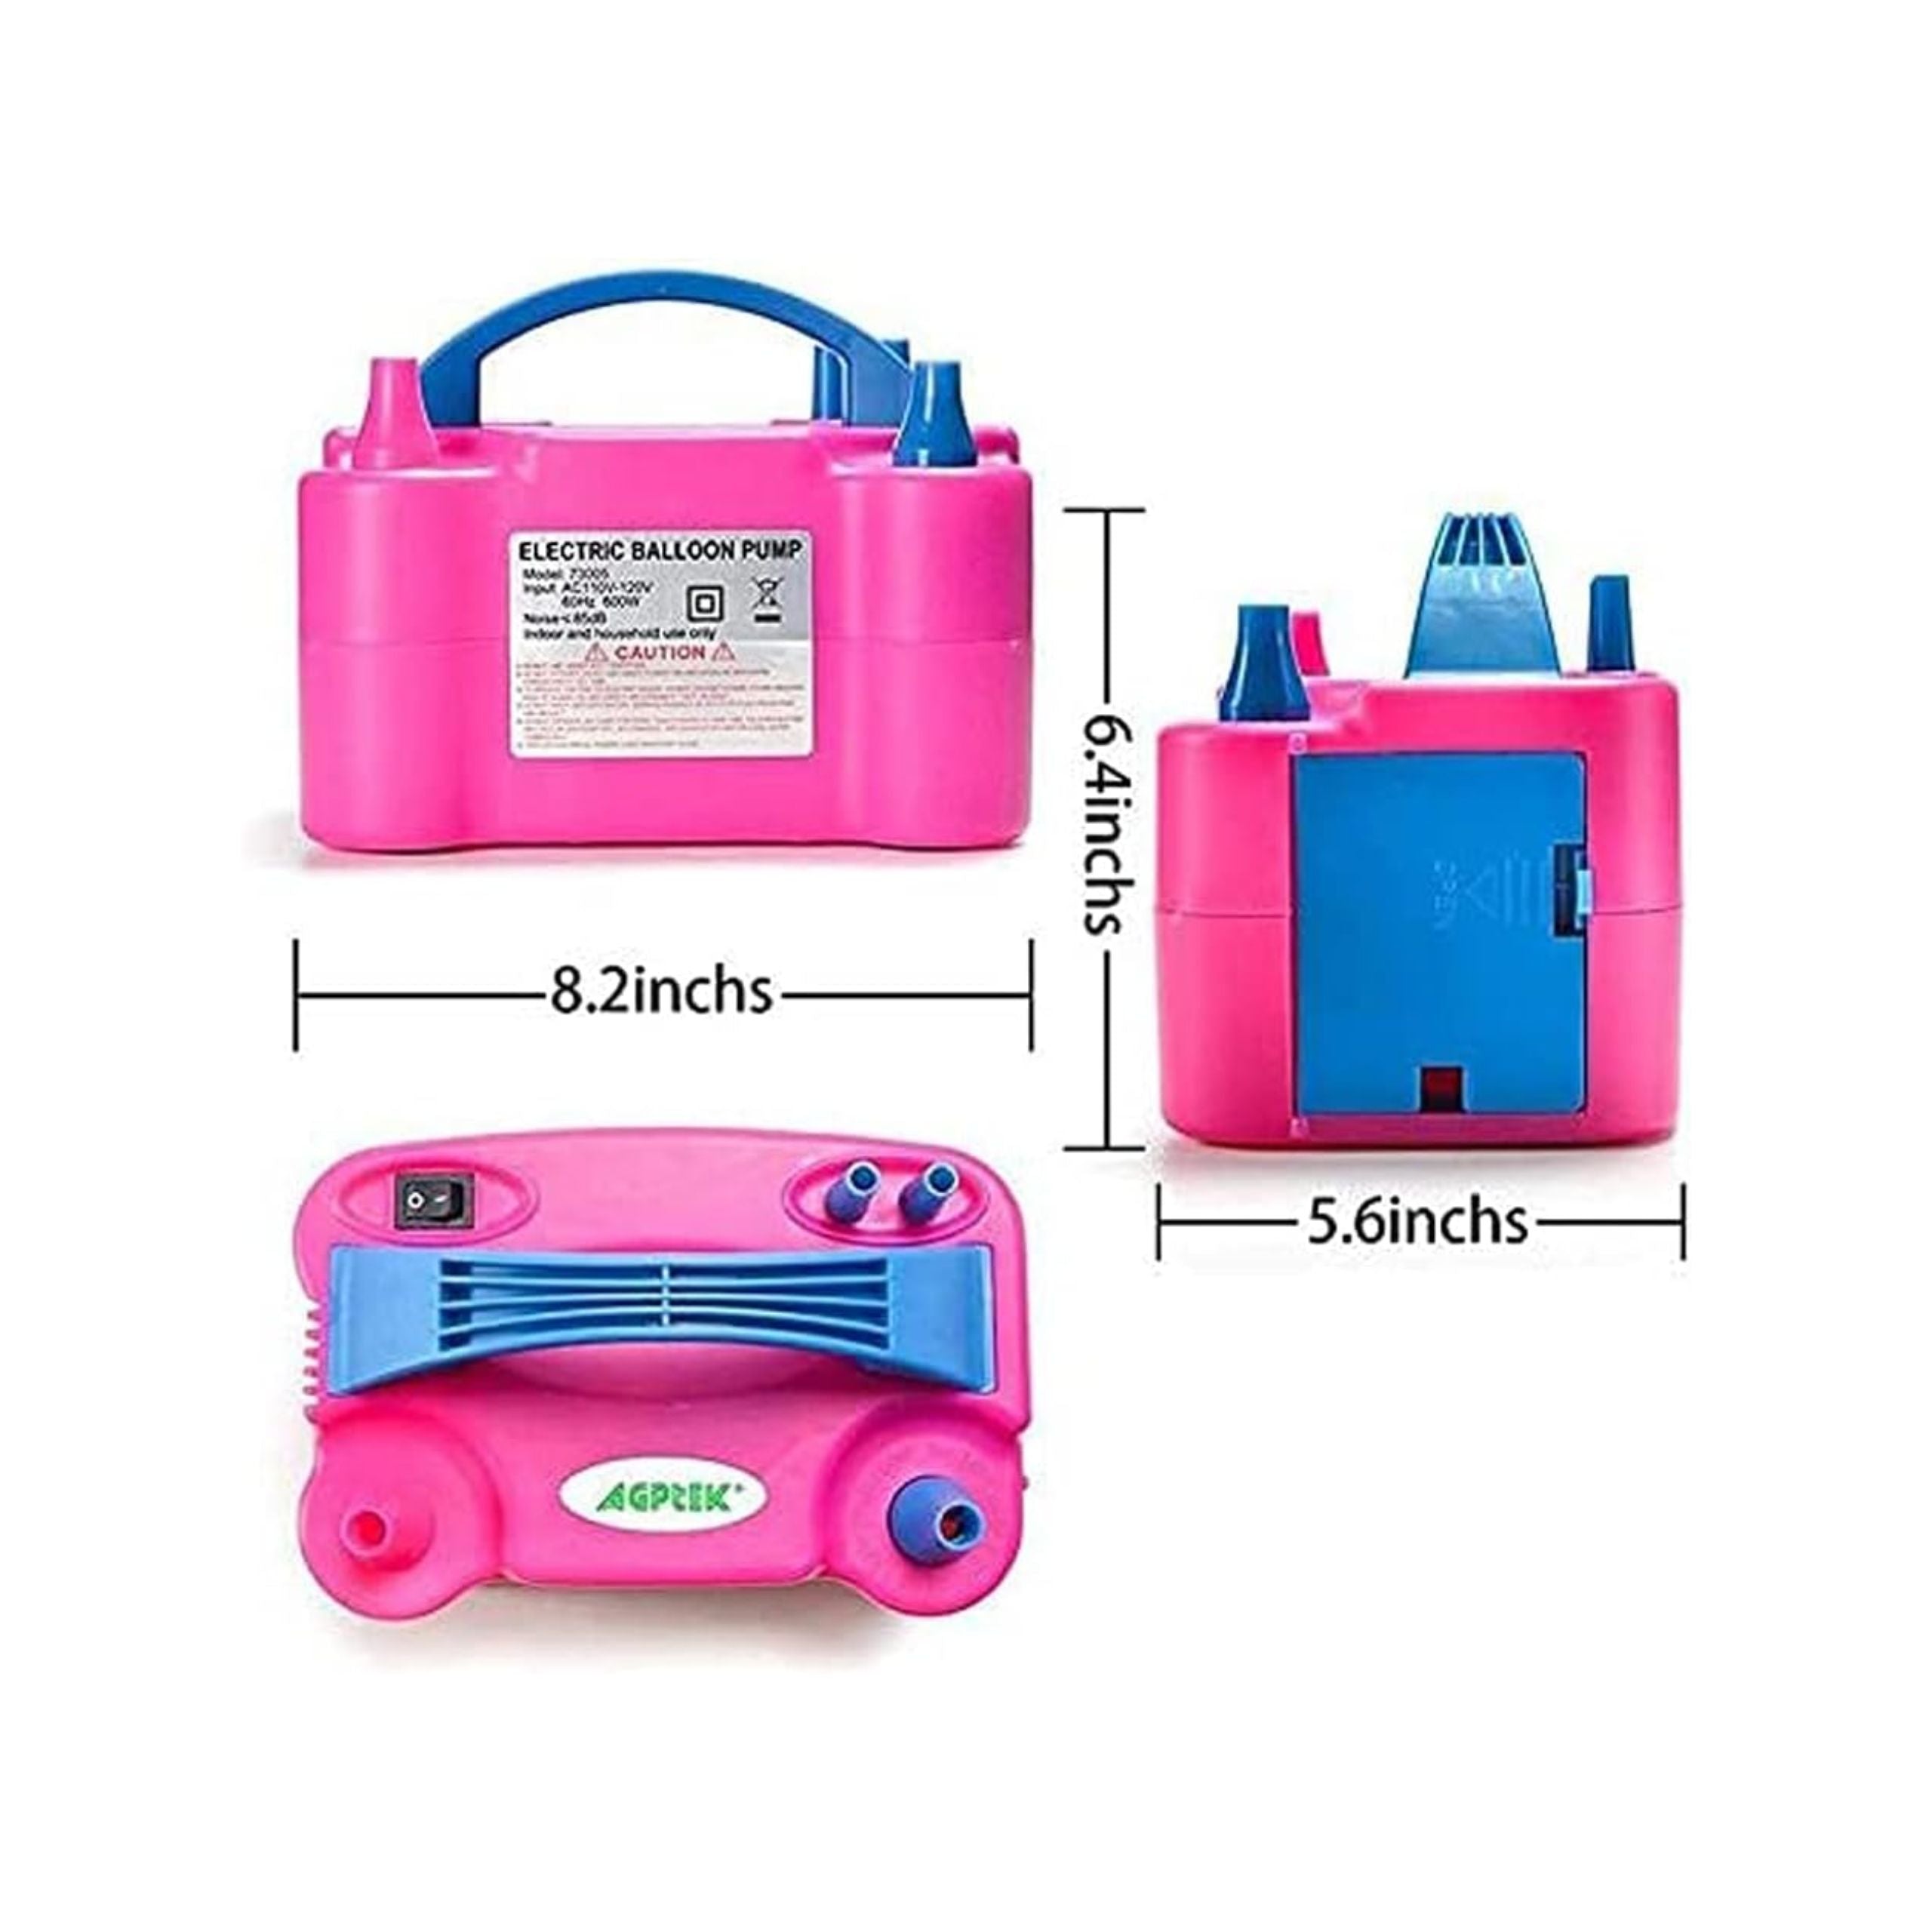 Electric Inflatable Balloon 220v Air Pump 73005 - Pink